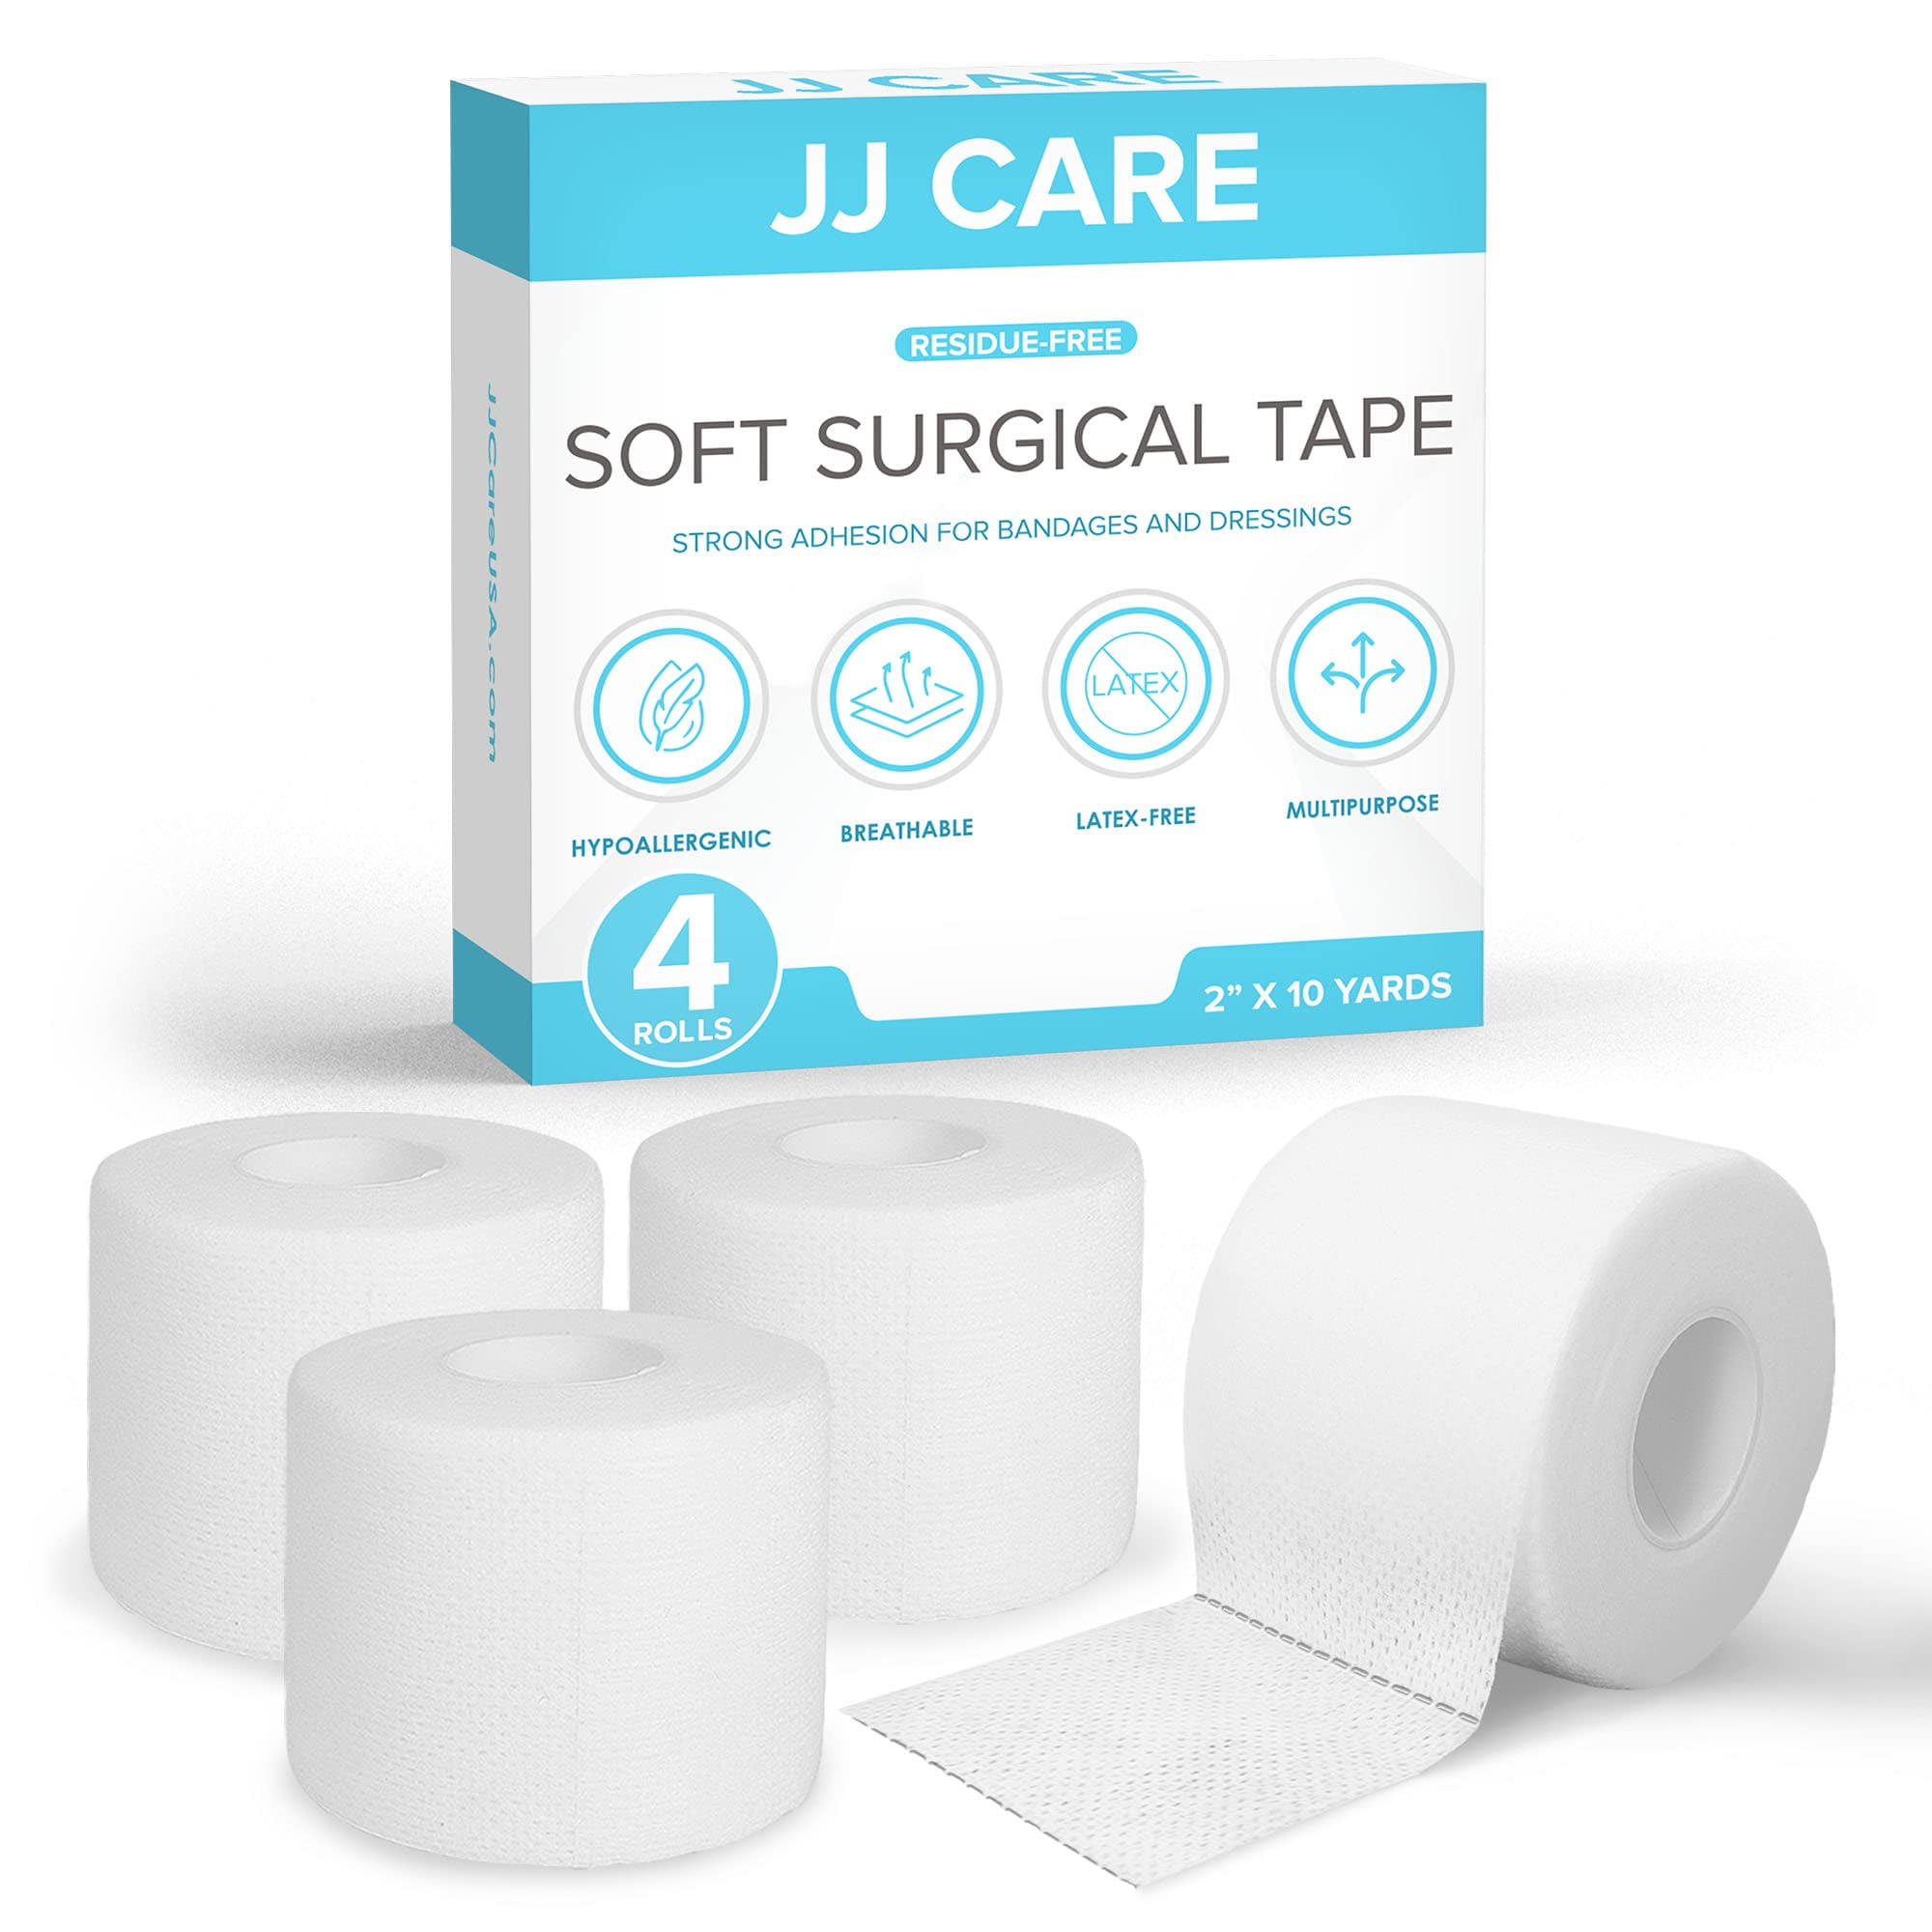 JJ CARE Soft Surgical Tape [Pack of 4], 2” x 10 Yards Soft Cloth Tape,  Latex-Free Cloth Medical Tape for First Aid, Breathable Cloth Surgical  Tape, Hypoallergenic Adhesive 